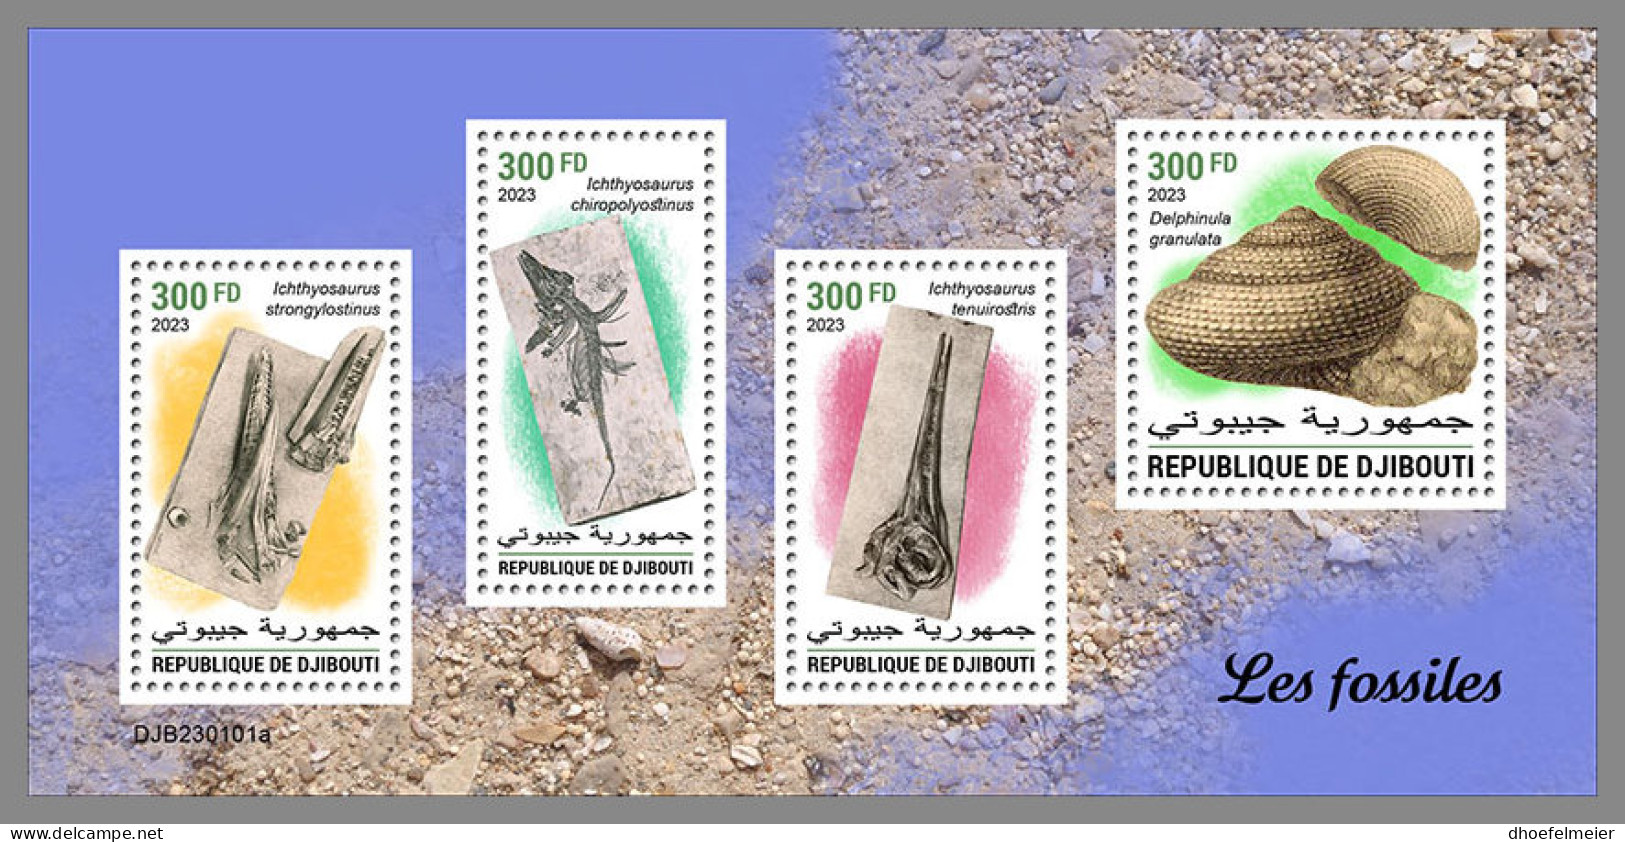 DJIBOUTI 2023 MNH Fossils Fossilien M/S - OFFICIAL ISSUE - DHQ2326 - Fossielen